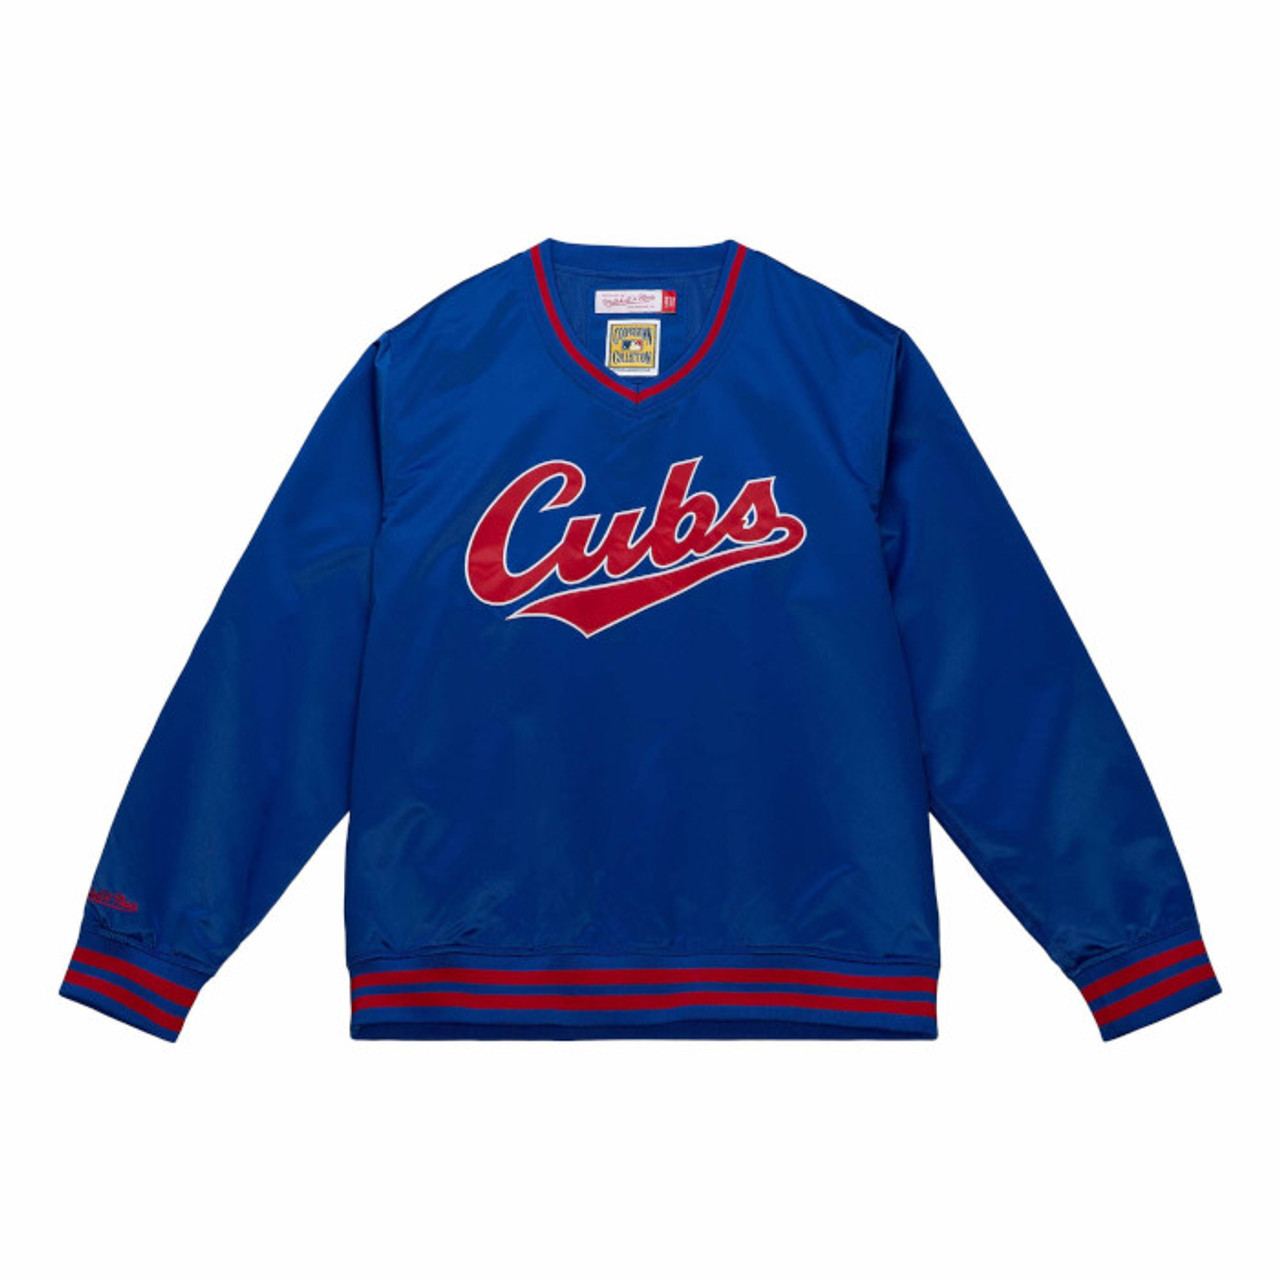 Men's Mitchell & Ness Chicago Cubs Sideline Pullover Royal Satin